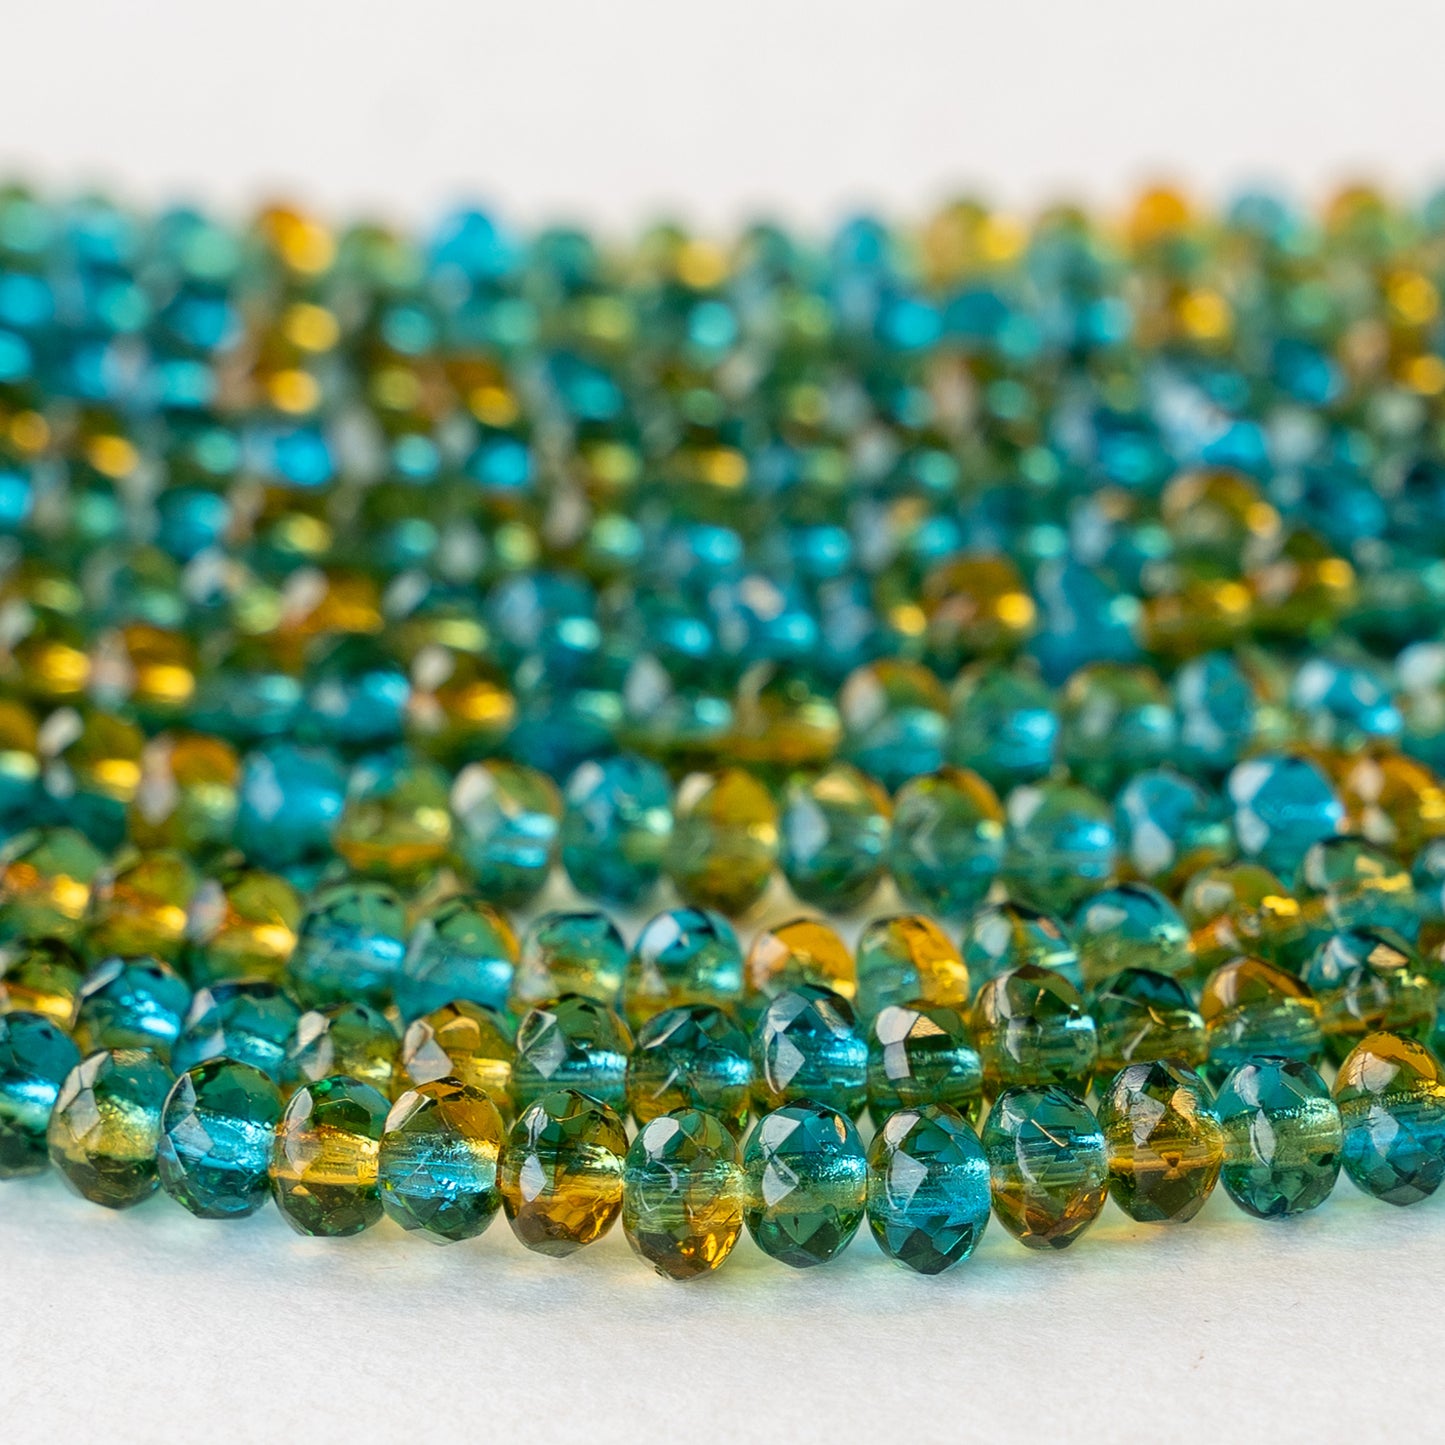 3x5mm Firepolished Glass Rondelles - Amber and Teal - 50 Beads